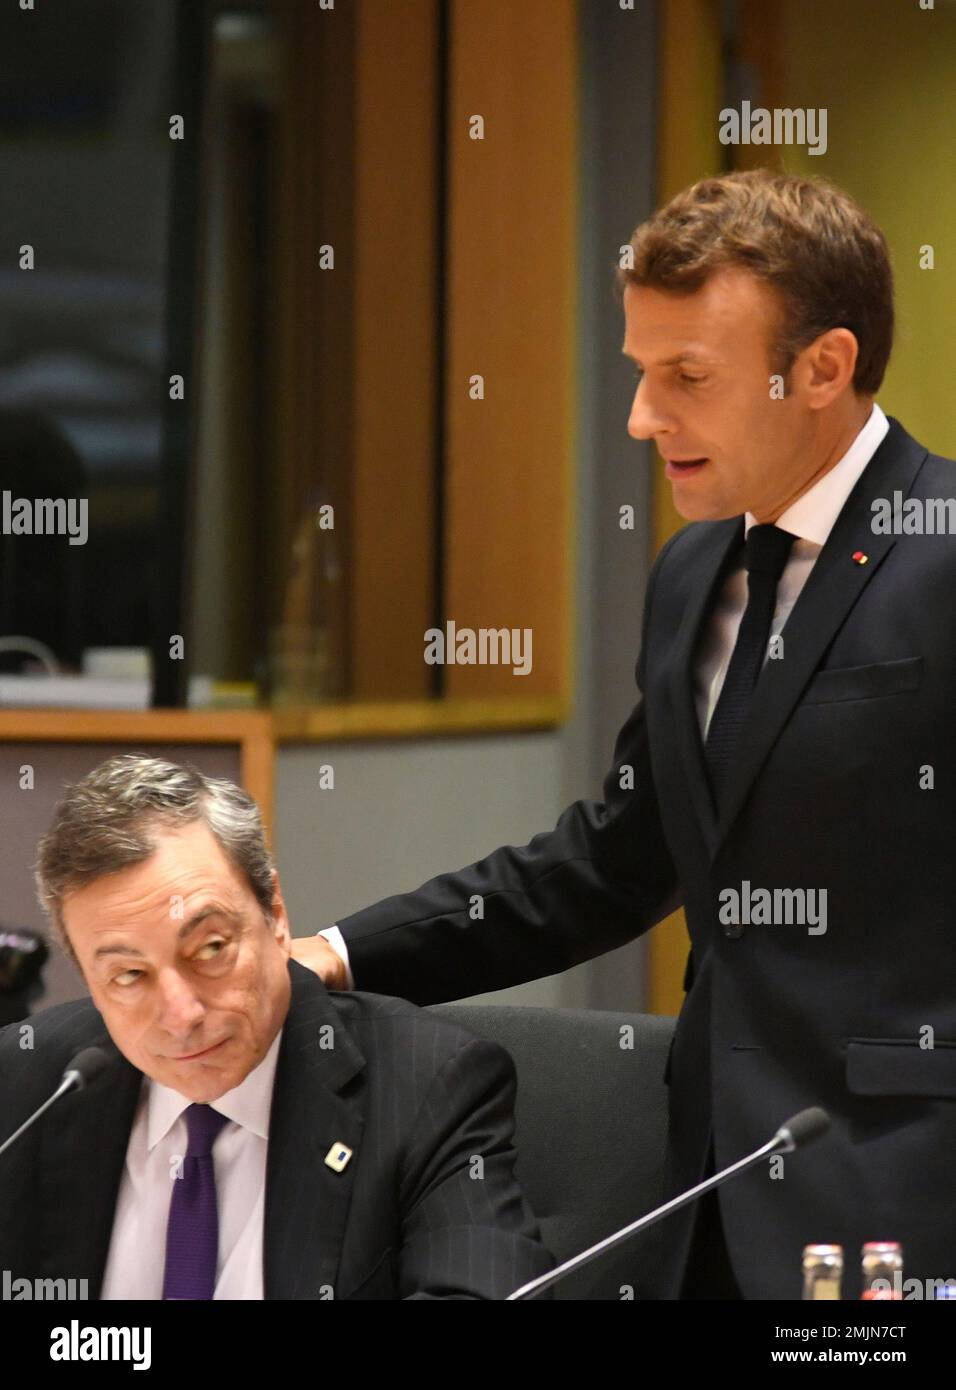 French President Emmanuel Macron, right, speaks with European Central Bank President Mario Draghi during a round table meeting at an EU summit in Brussels, Friday, June 21, 2019. EU leaders conclude a two-day summit on Friday in which they will discuss the euro-area. (AP Photo/Riccardo Pareggiani) Stockfoto